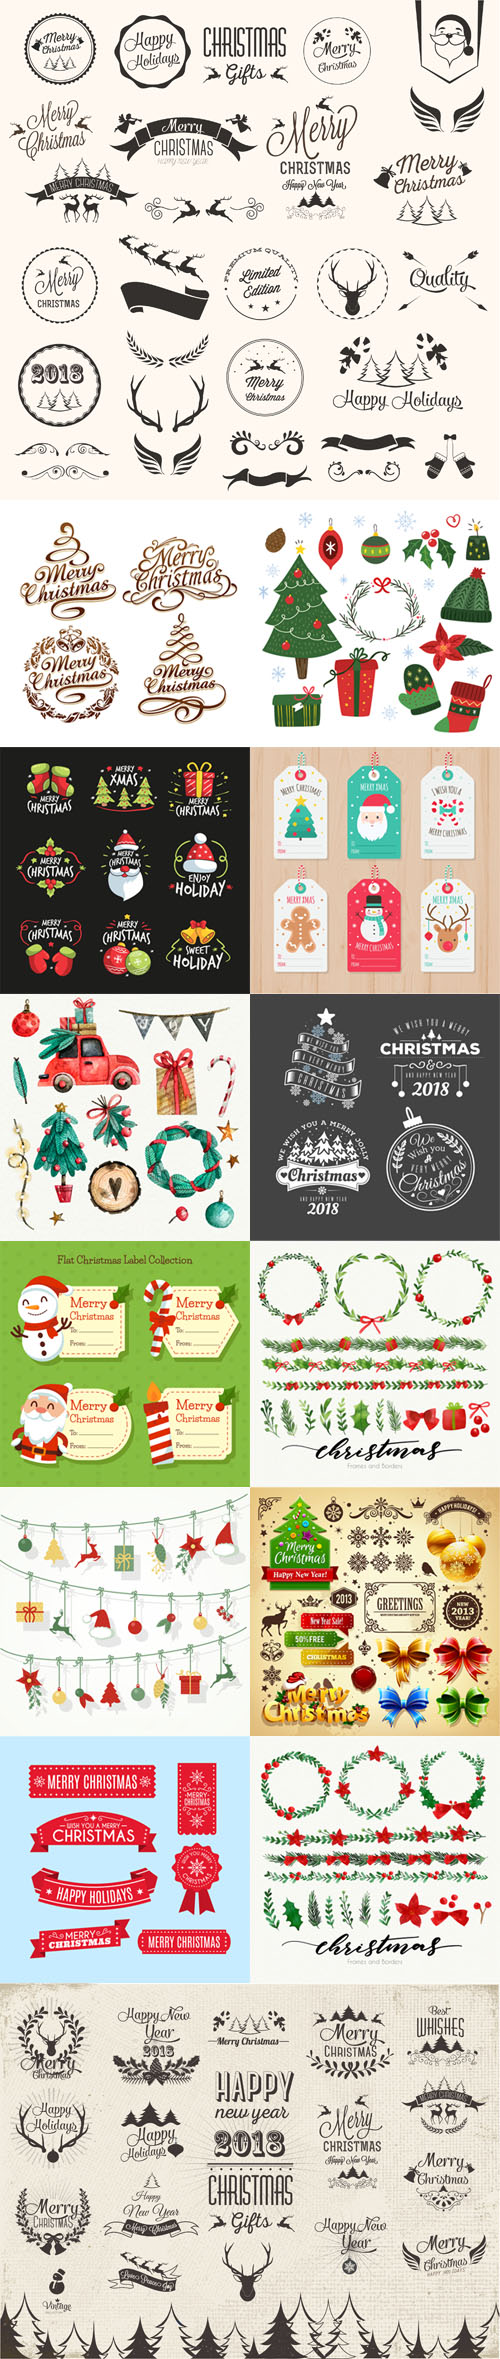 Pretty Christmas Elements Collection in Vector